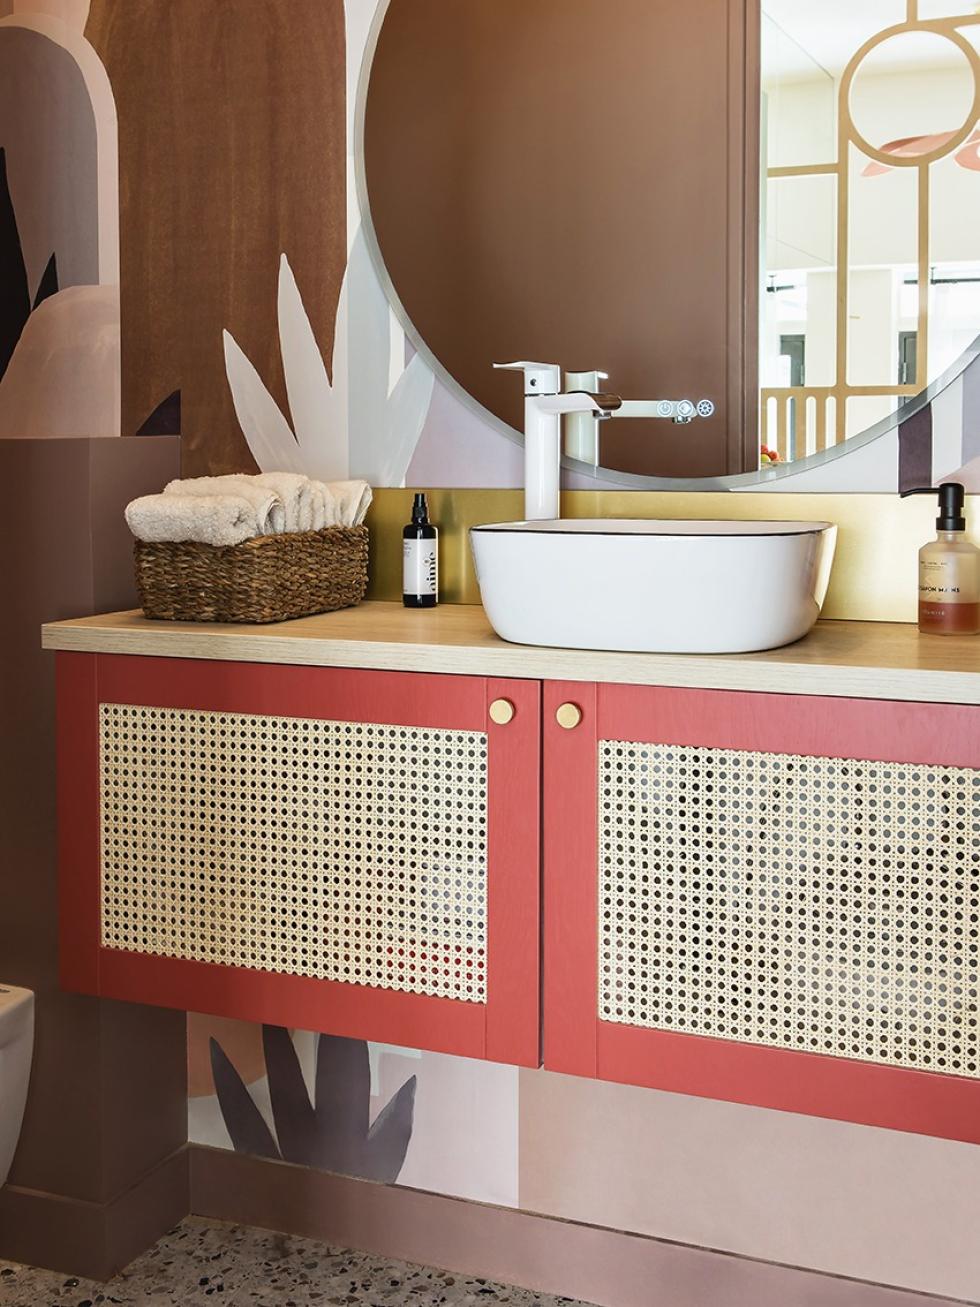 Hanging bathroom cabinet with wicker fronts and brass credenza